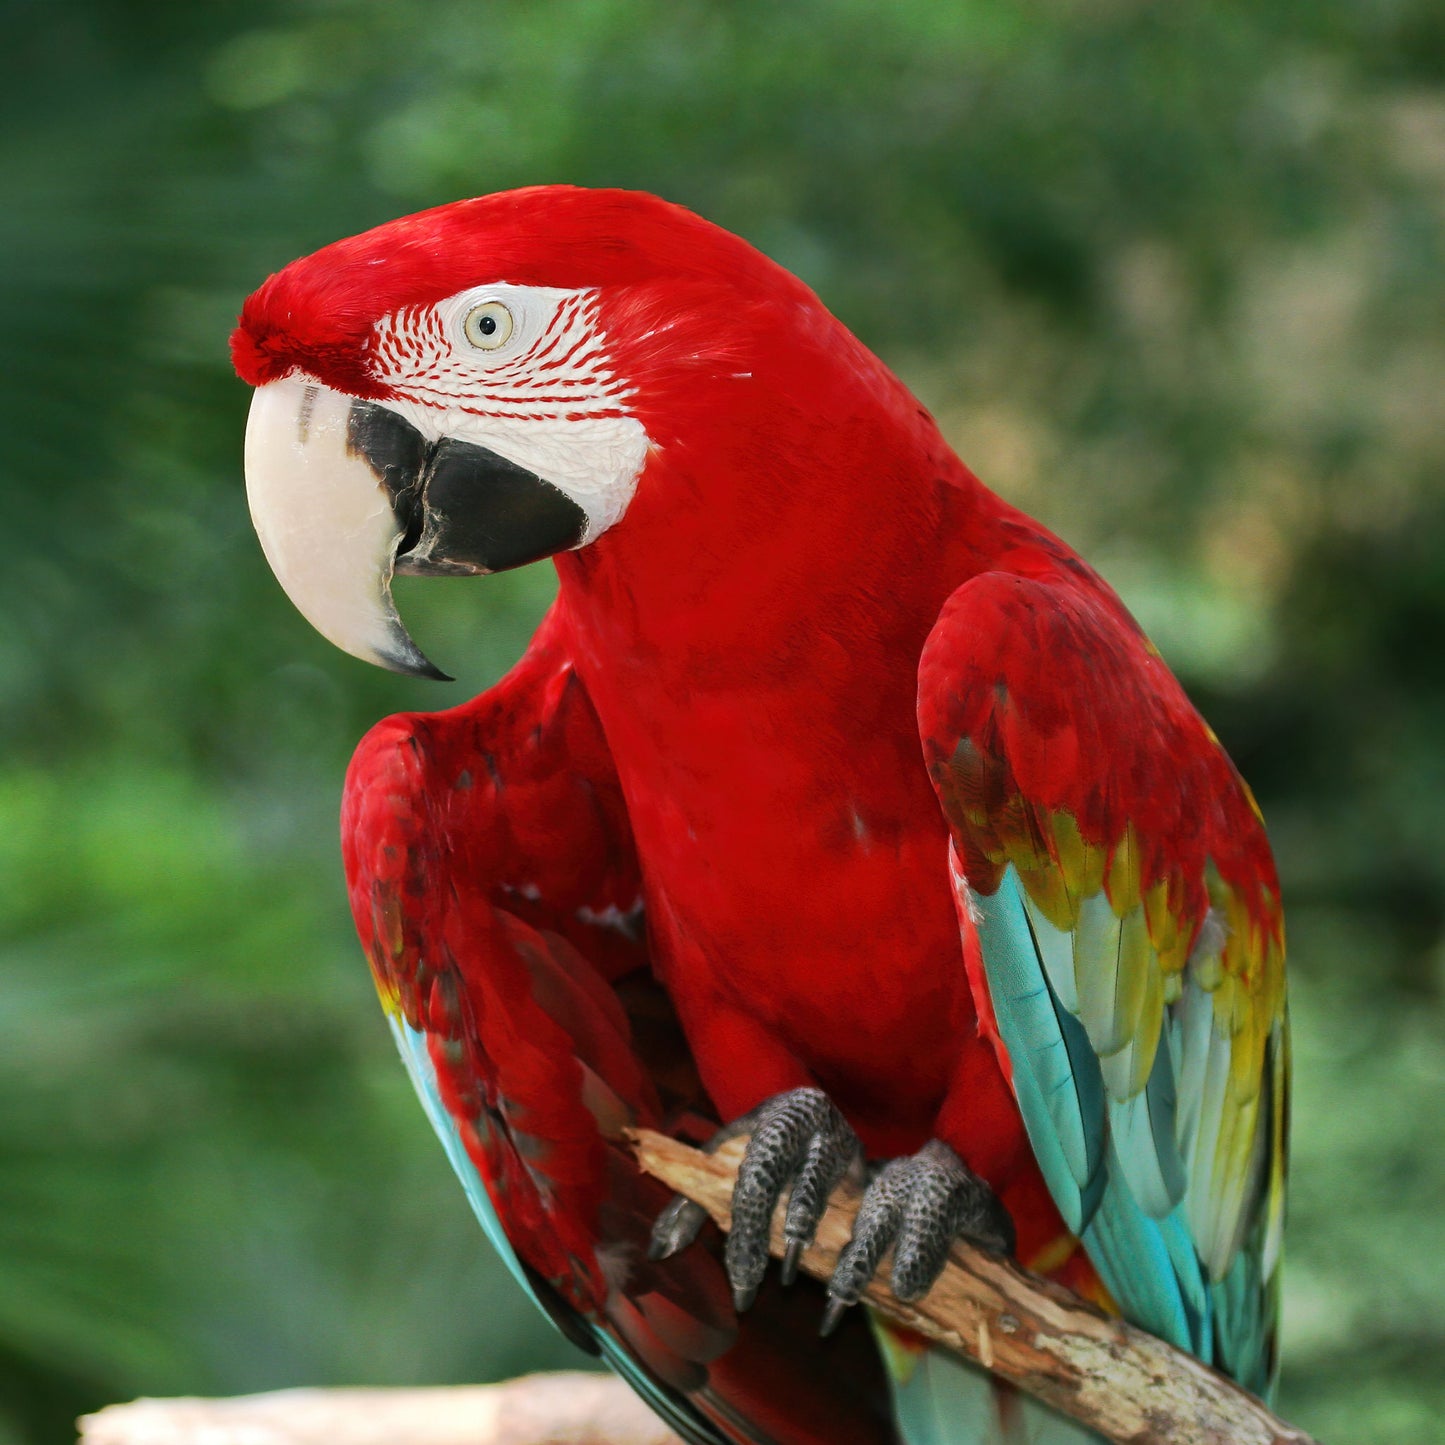 Red-and-green Macaw photo print, colorful bird wall art, red parrot wall decor, nature photography, paper, canvas 5x7 8x10 11x14 16x20 16x24